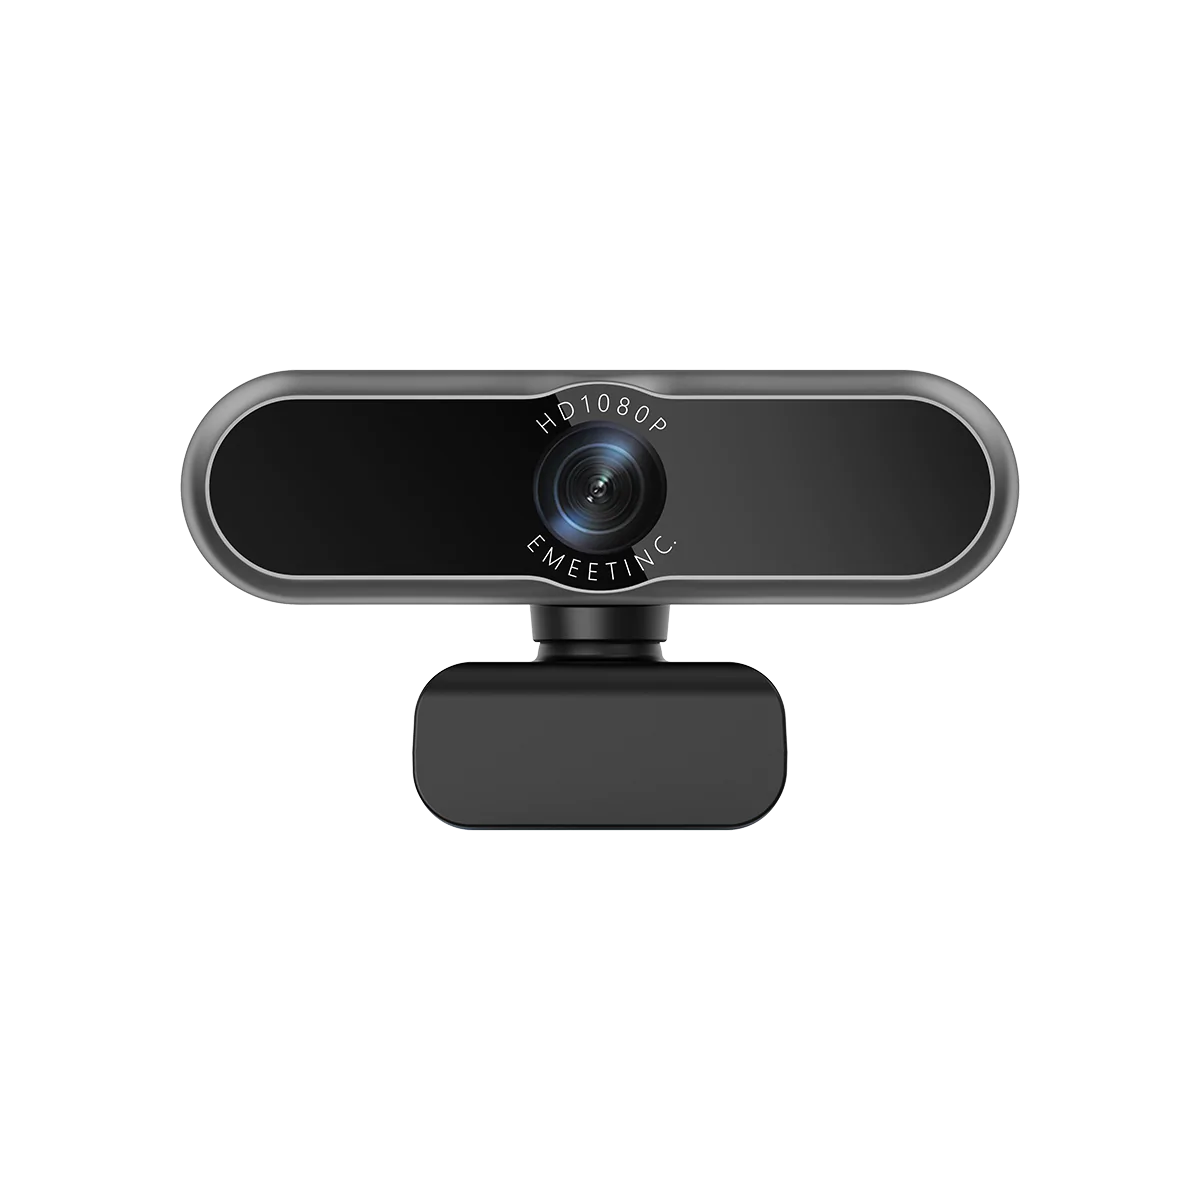 1080P Webcam with Light - Web Camera with Built-in Privacy Cover &  Microphone, Web Cam w/ 90° View, Plug&Play USB Webcam for Streaming